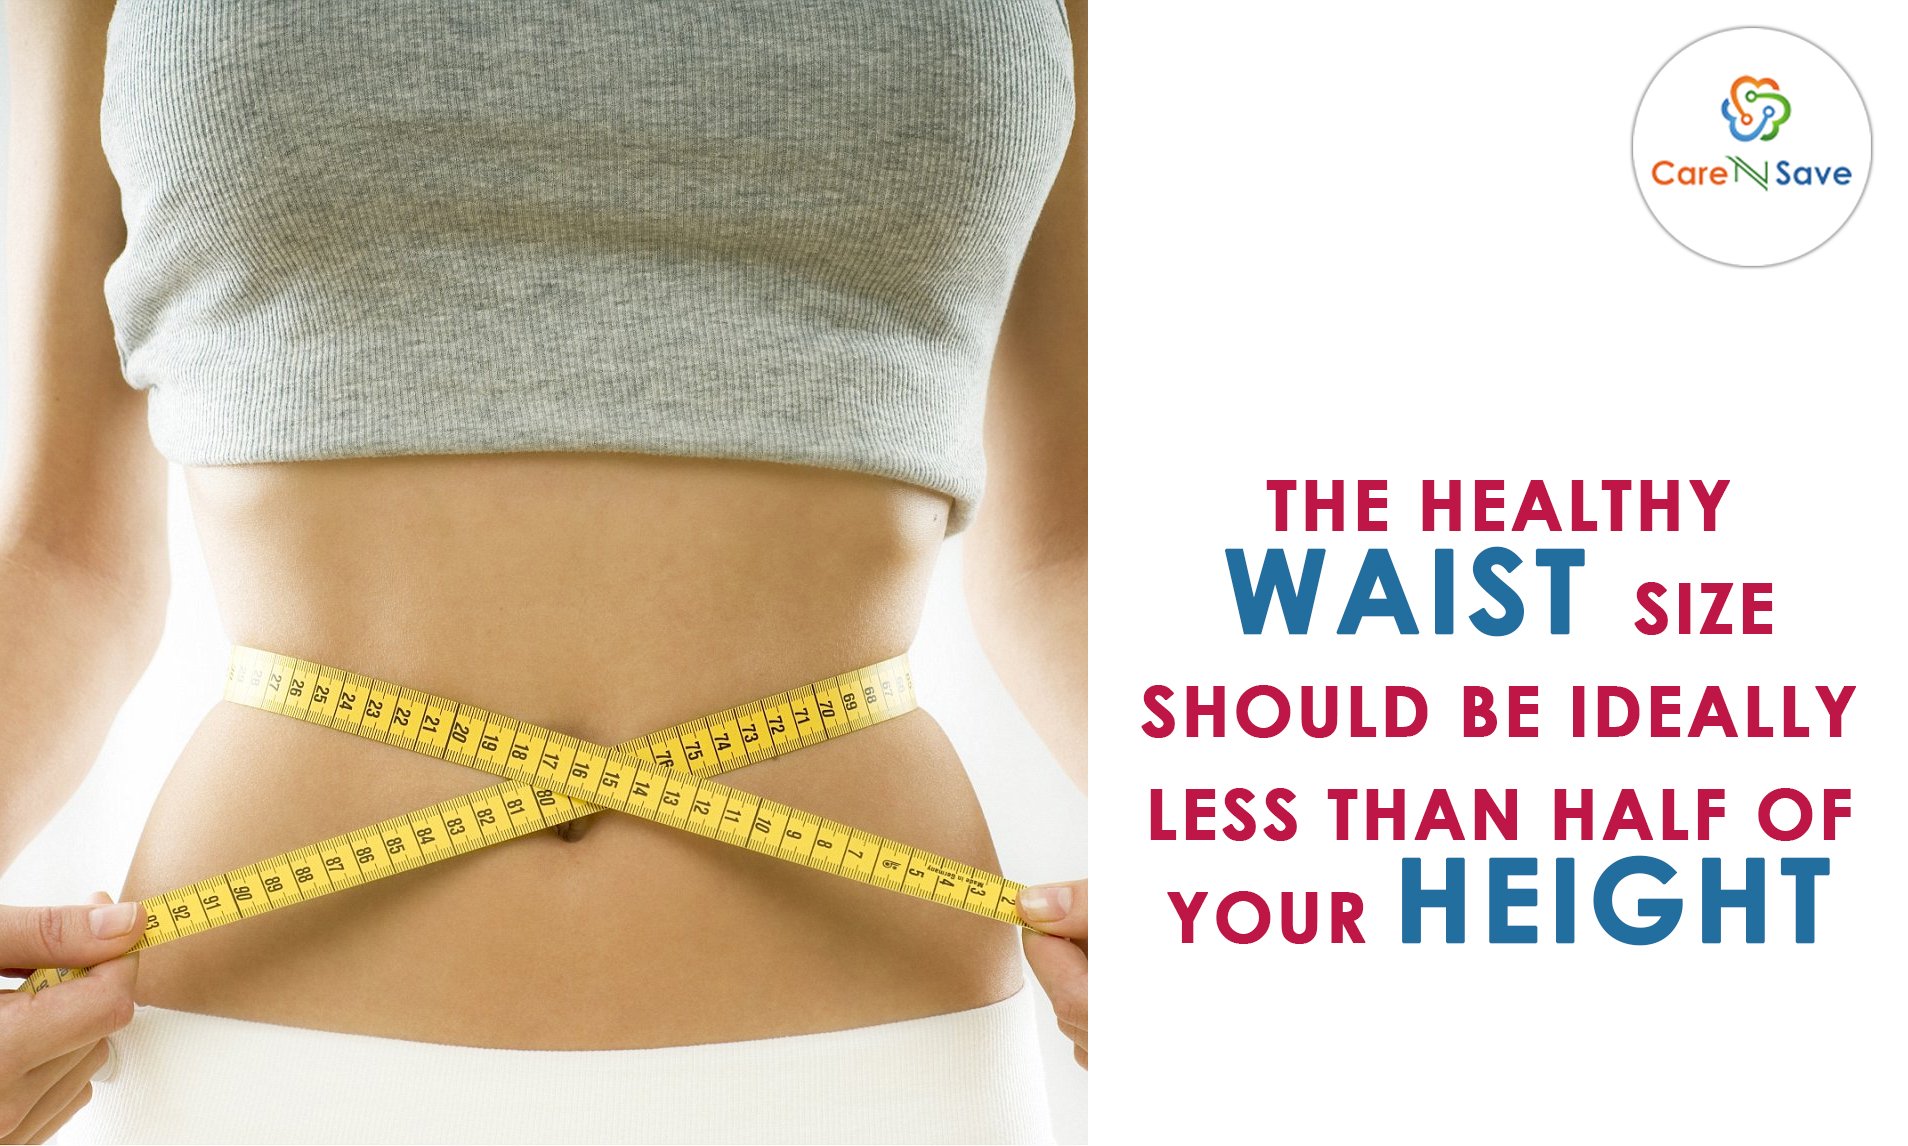 Waist circumference is 'vital sign' of health and should be